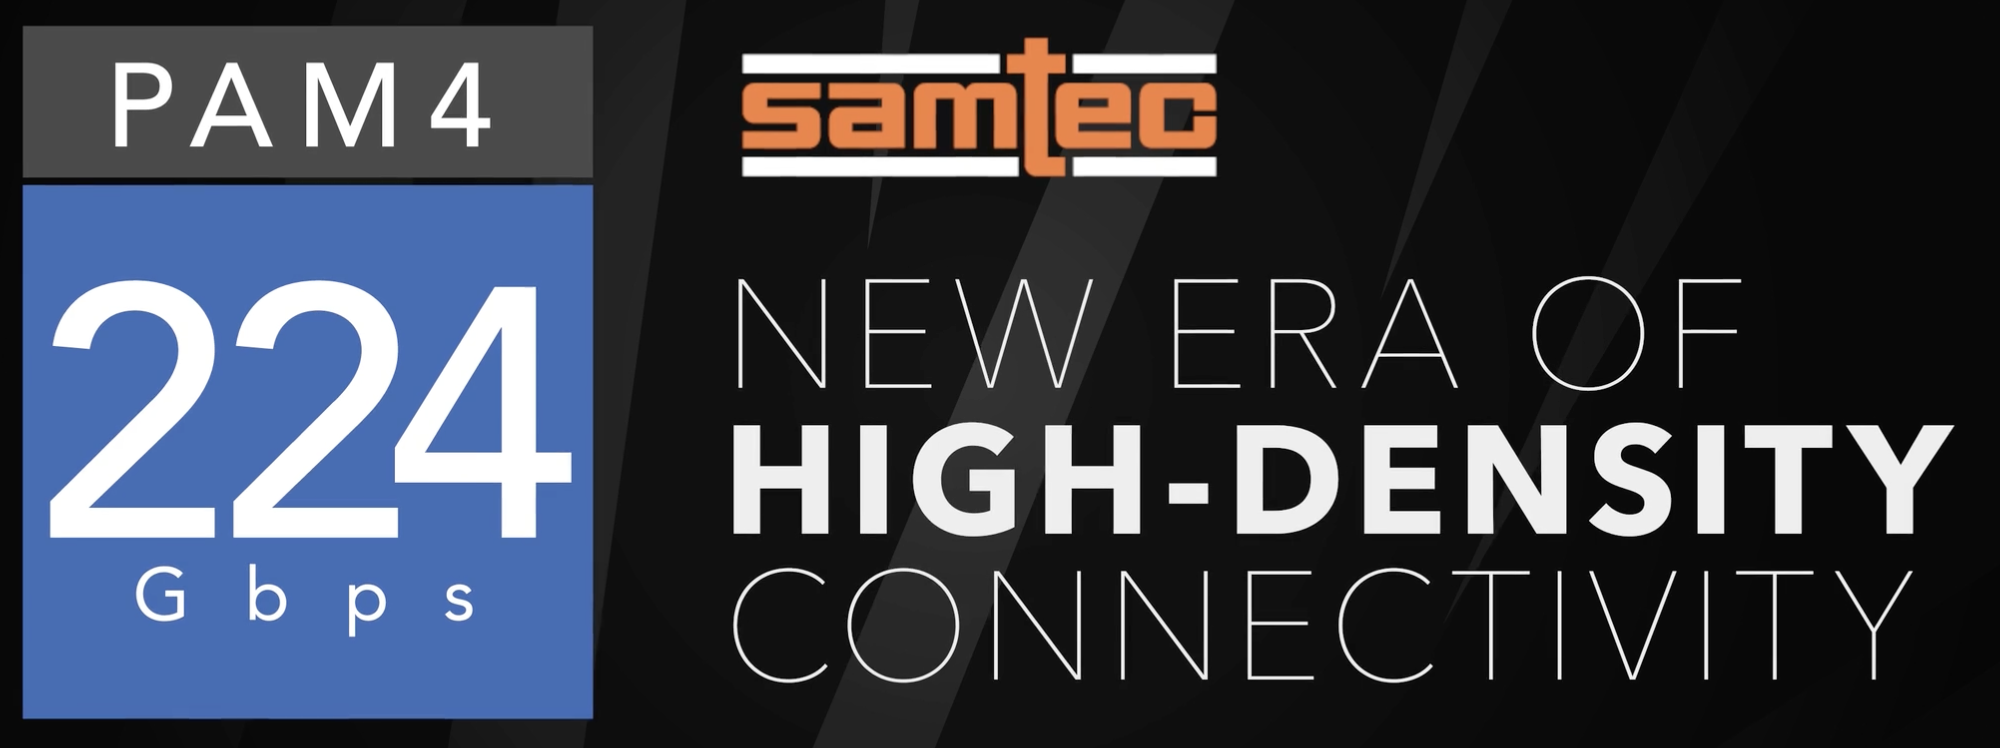 Samtec Welcomes You to the Future with Proven 224G PAM4 Interconnect Solutions